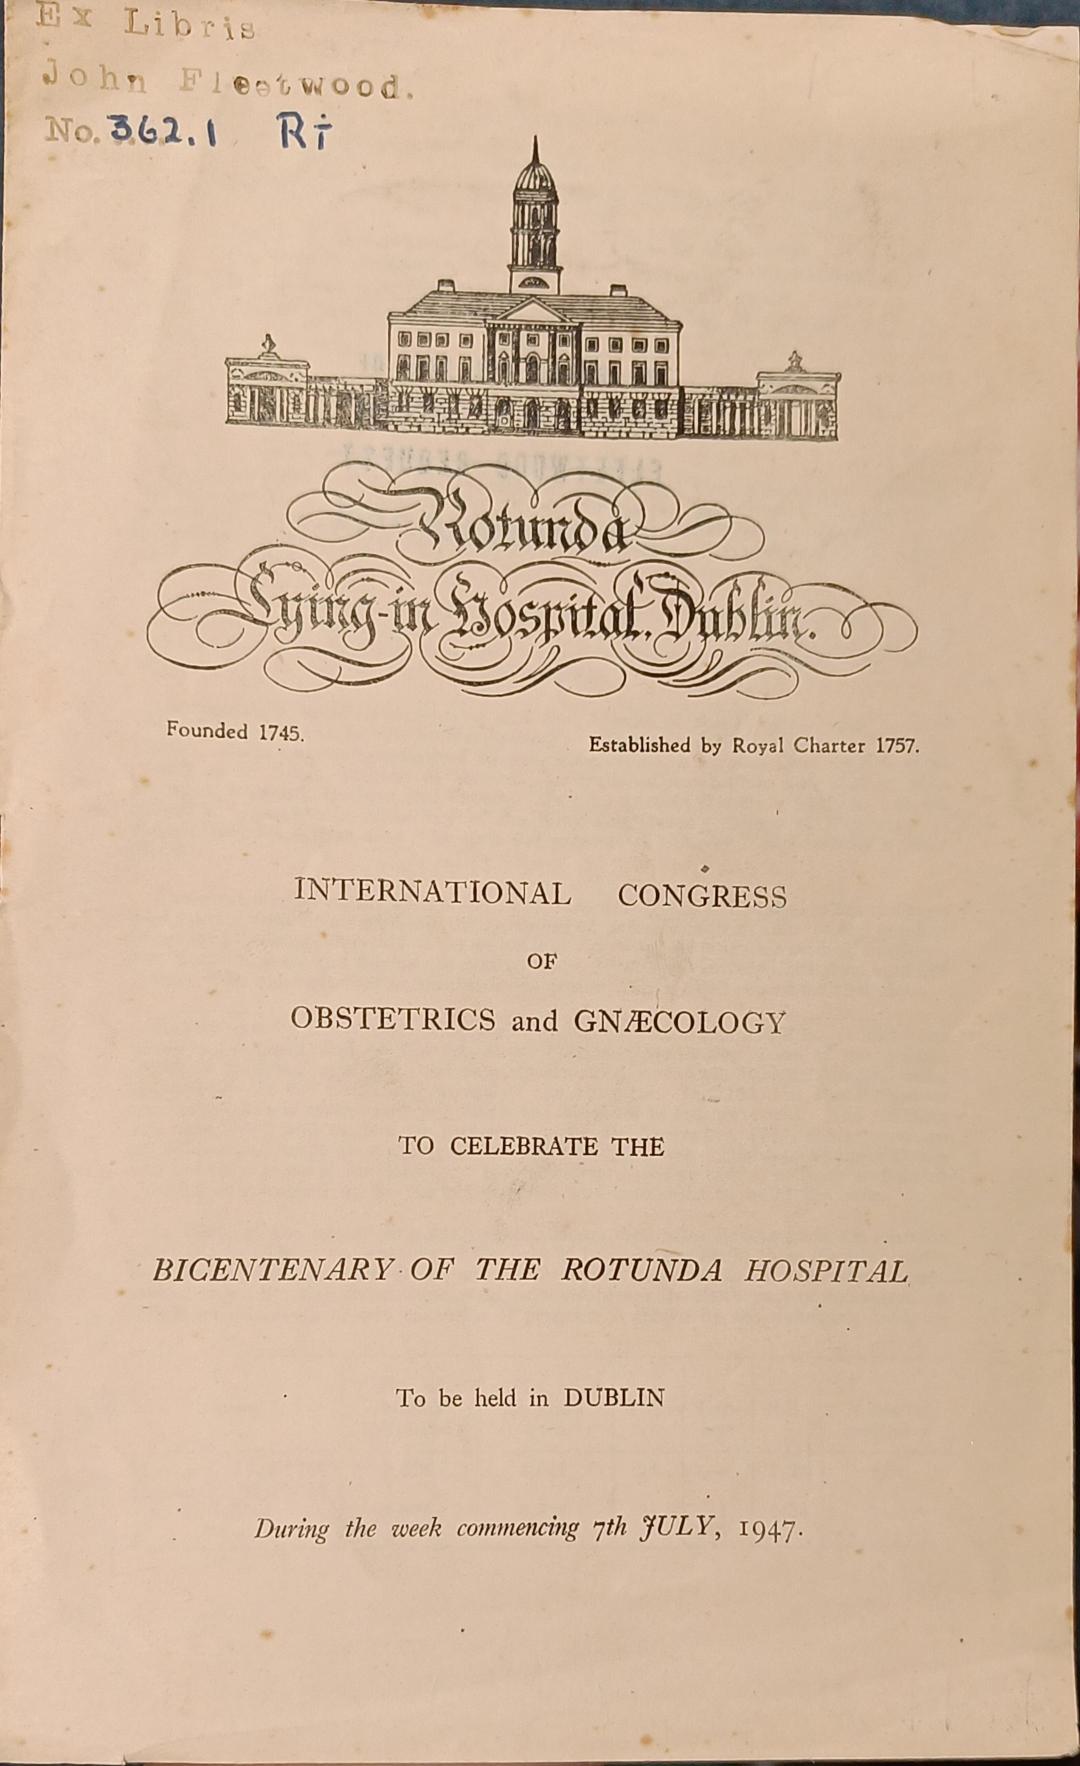 International Congress of Obstetrics and Gynaecology. to Celebrate the Bicentenary of the Rotunda Hospital 1947